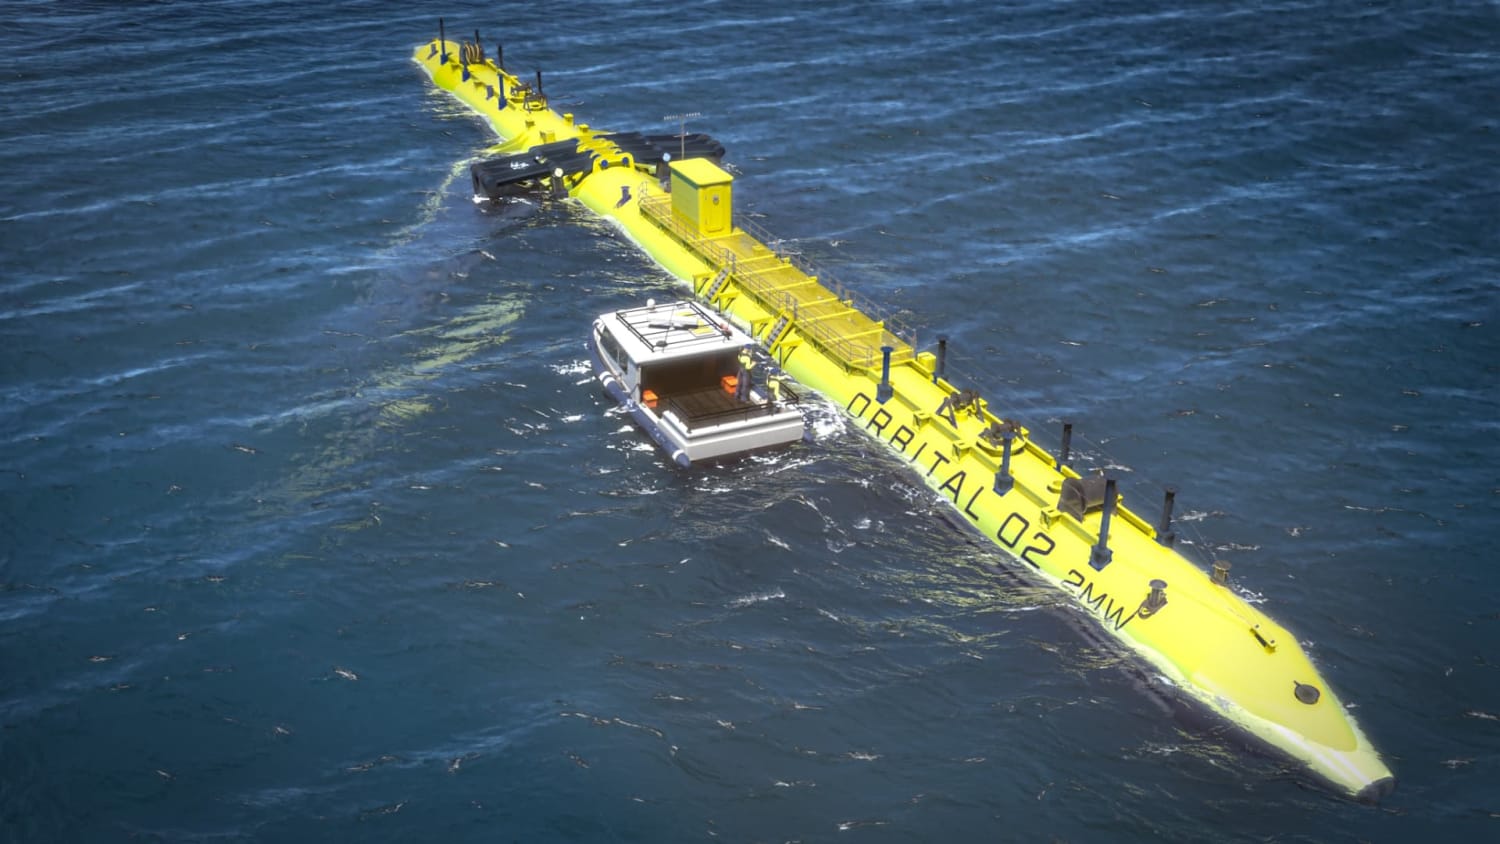 The 'world's most powerful' tidal turbine gets $8.97 million in new funding round